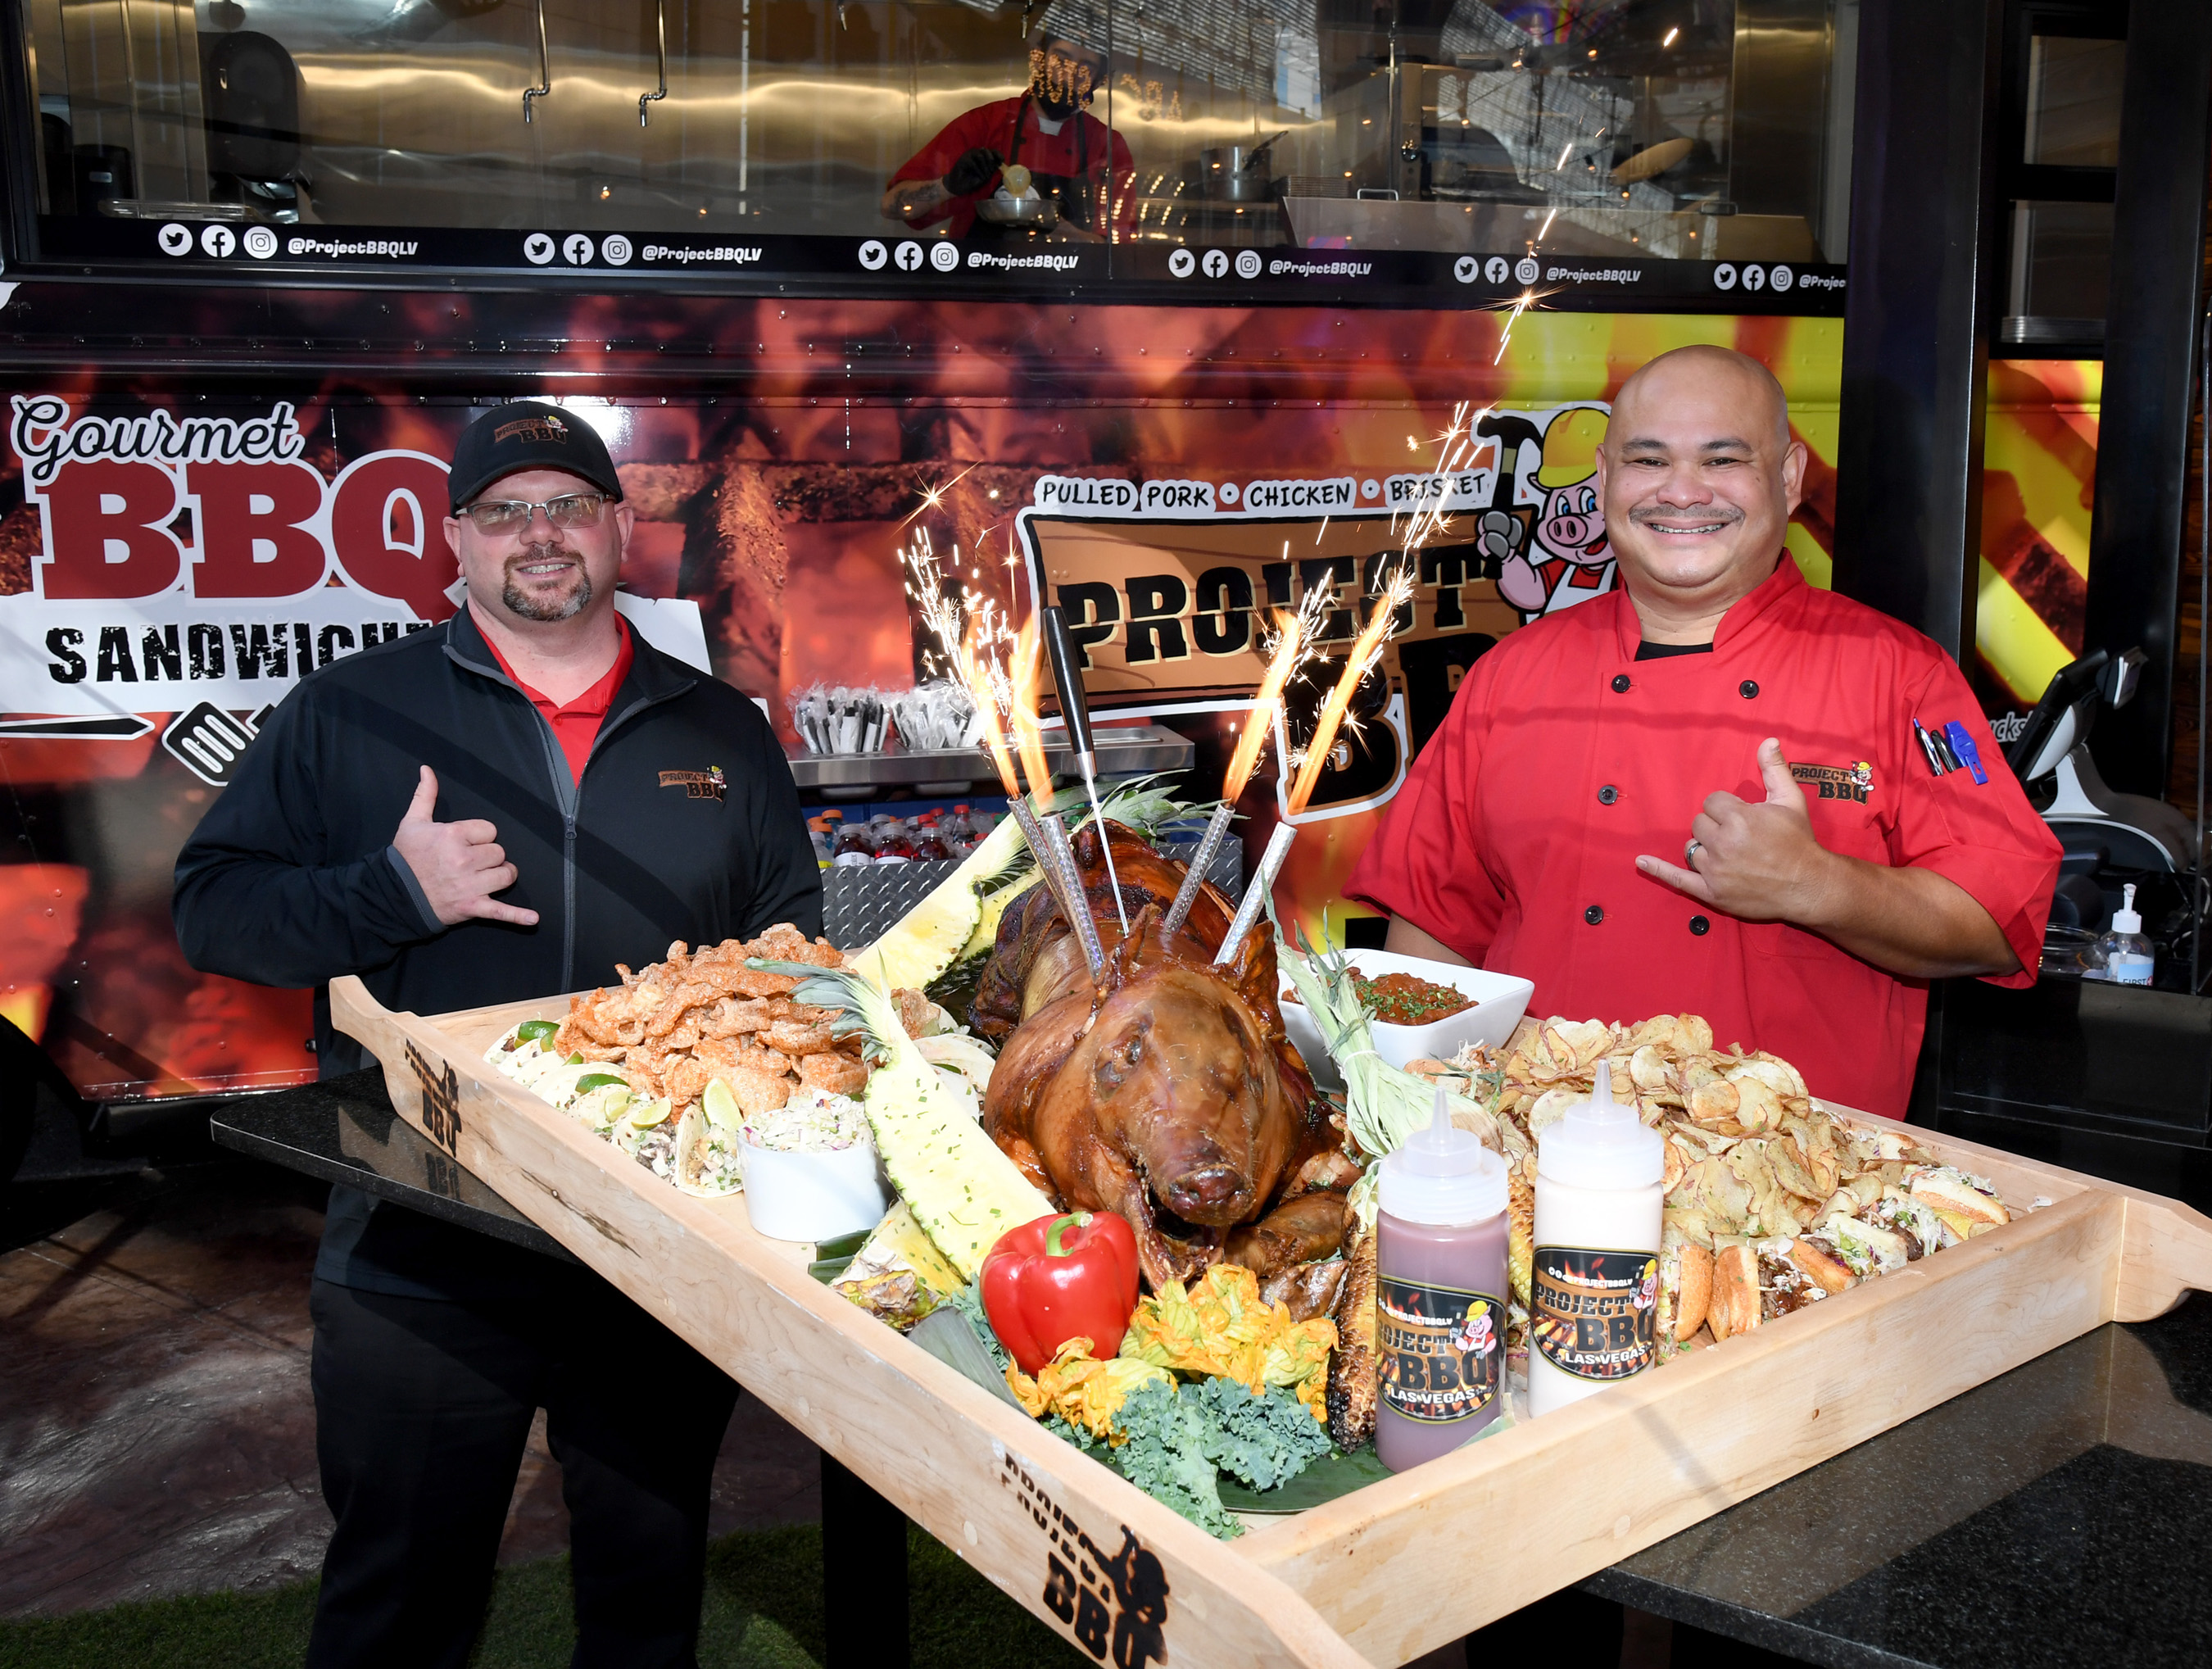 Rob baker and Chef Rex posing with a roasted pig